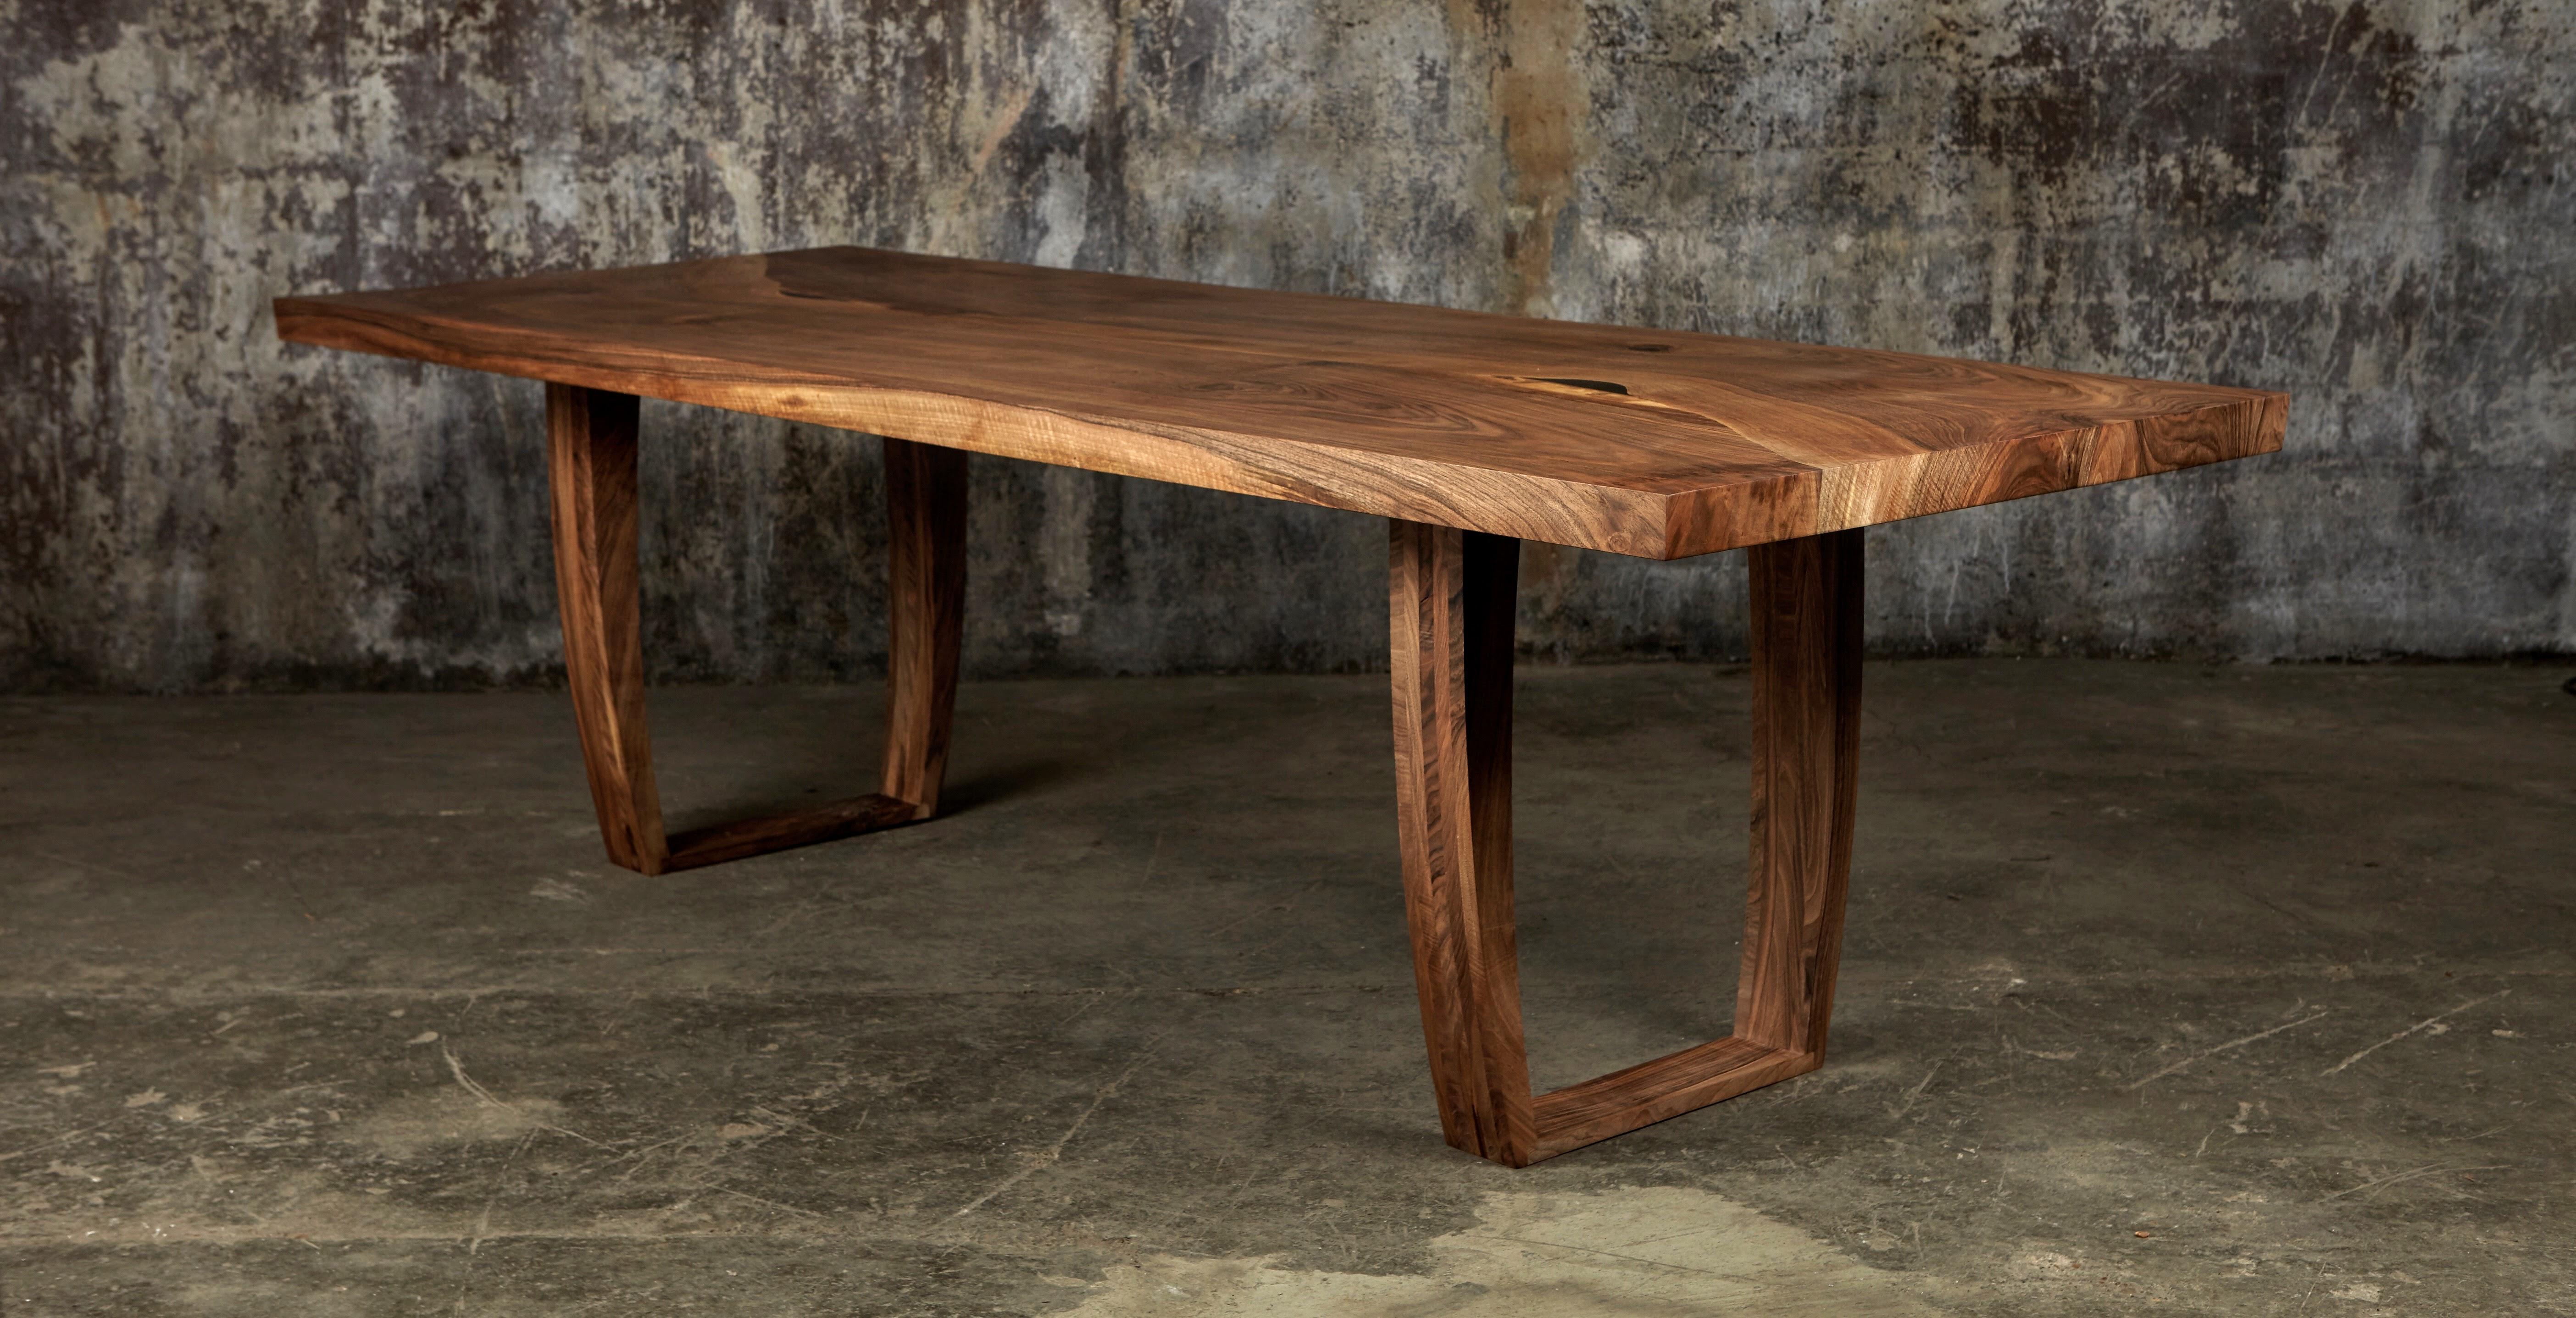 Commissioned for a private client, this dining table was the first of three tables we made from a single trunk of English walnut that was rich in ripple. 
The ripple in this walnut, when sanded and given a coat of oil, gives the illusion of being a